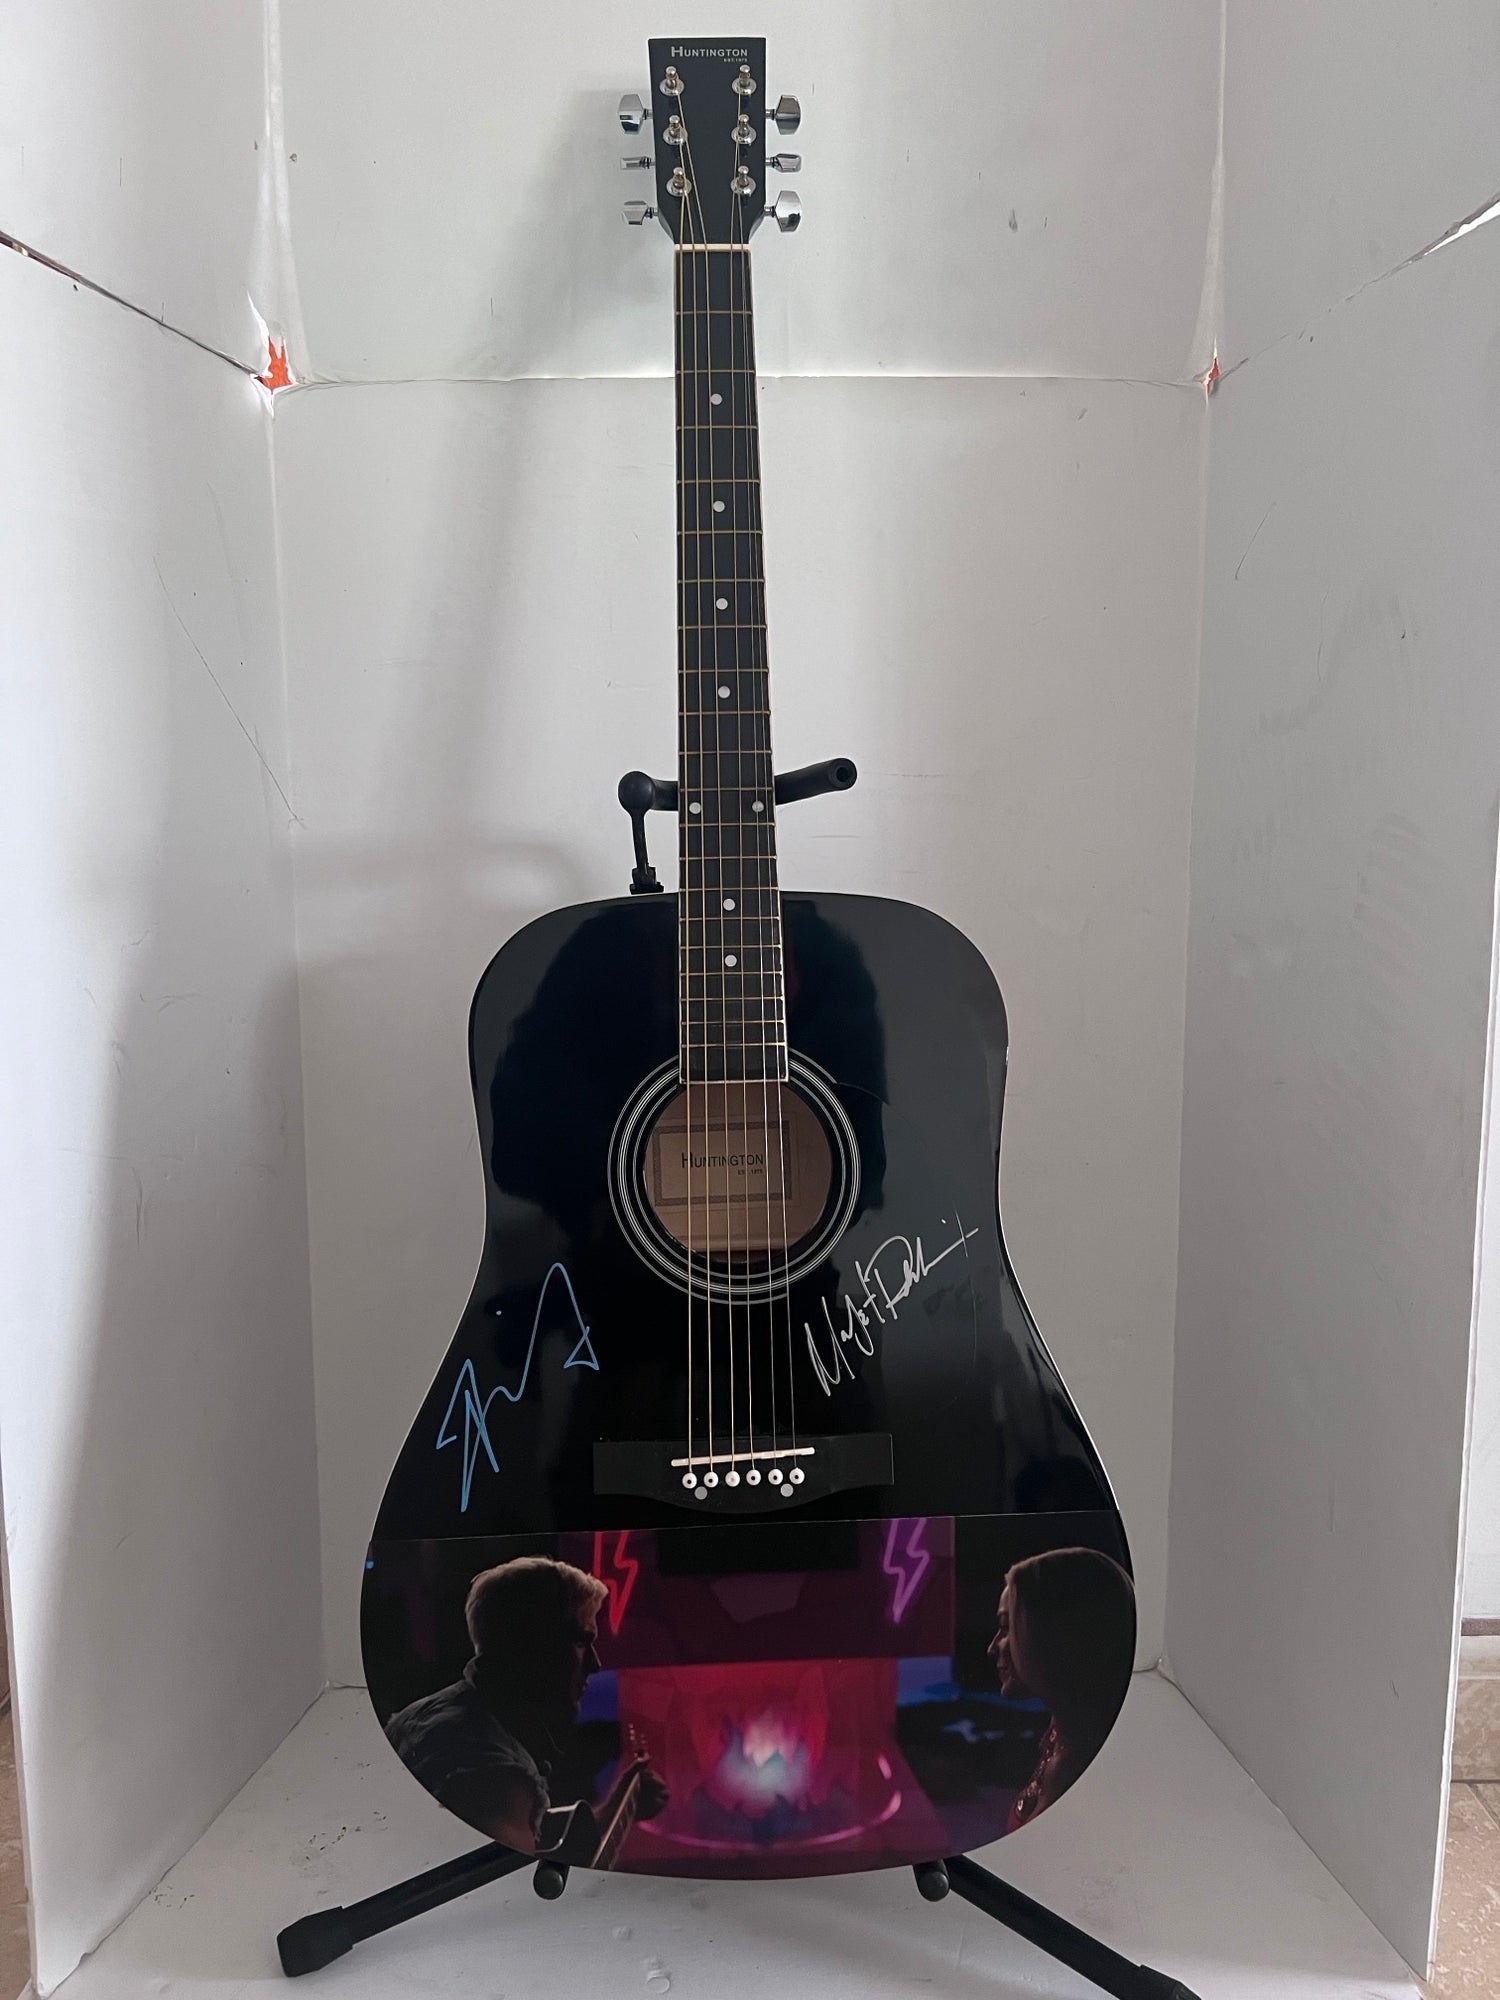 Ken and Barbie-Ryan Gosling, Margot Robbie one-of-a-kind full size acoustic guitar signed with proof